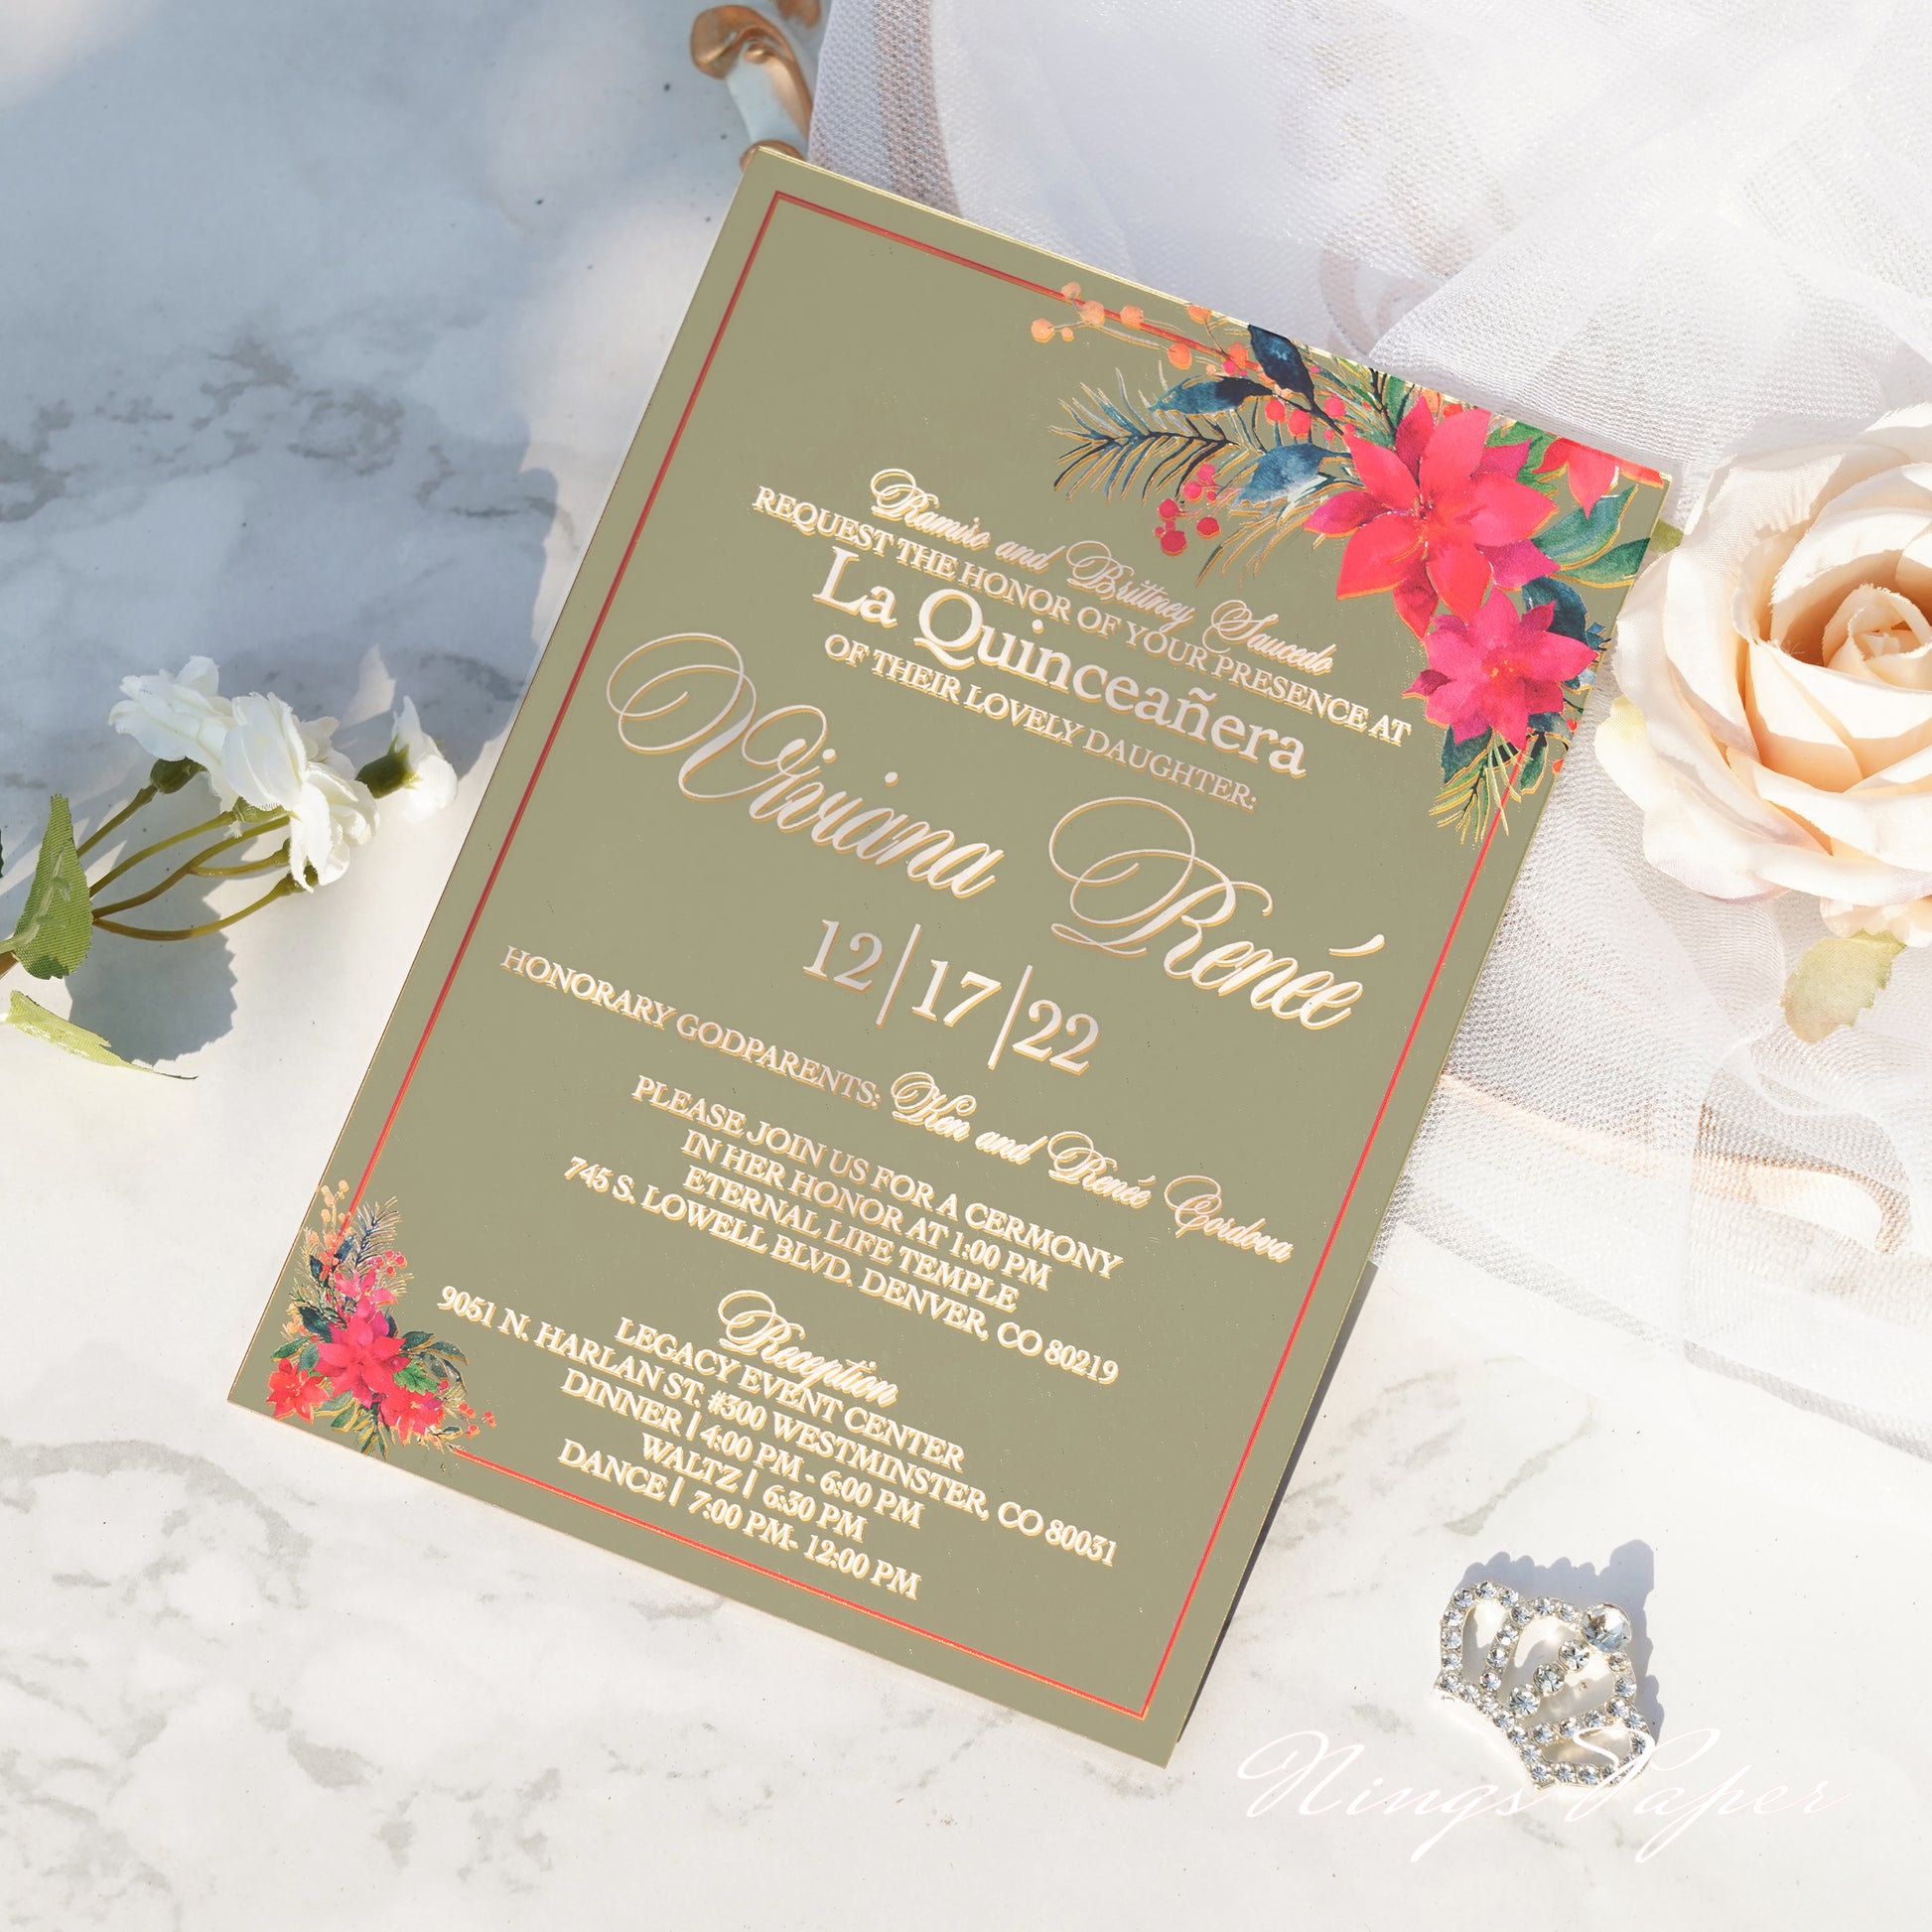 White and Gold Quinceanera Invitations